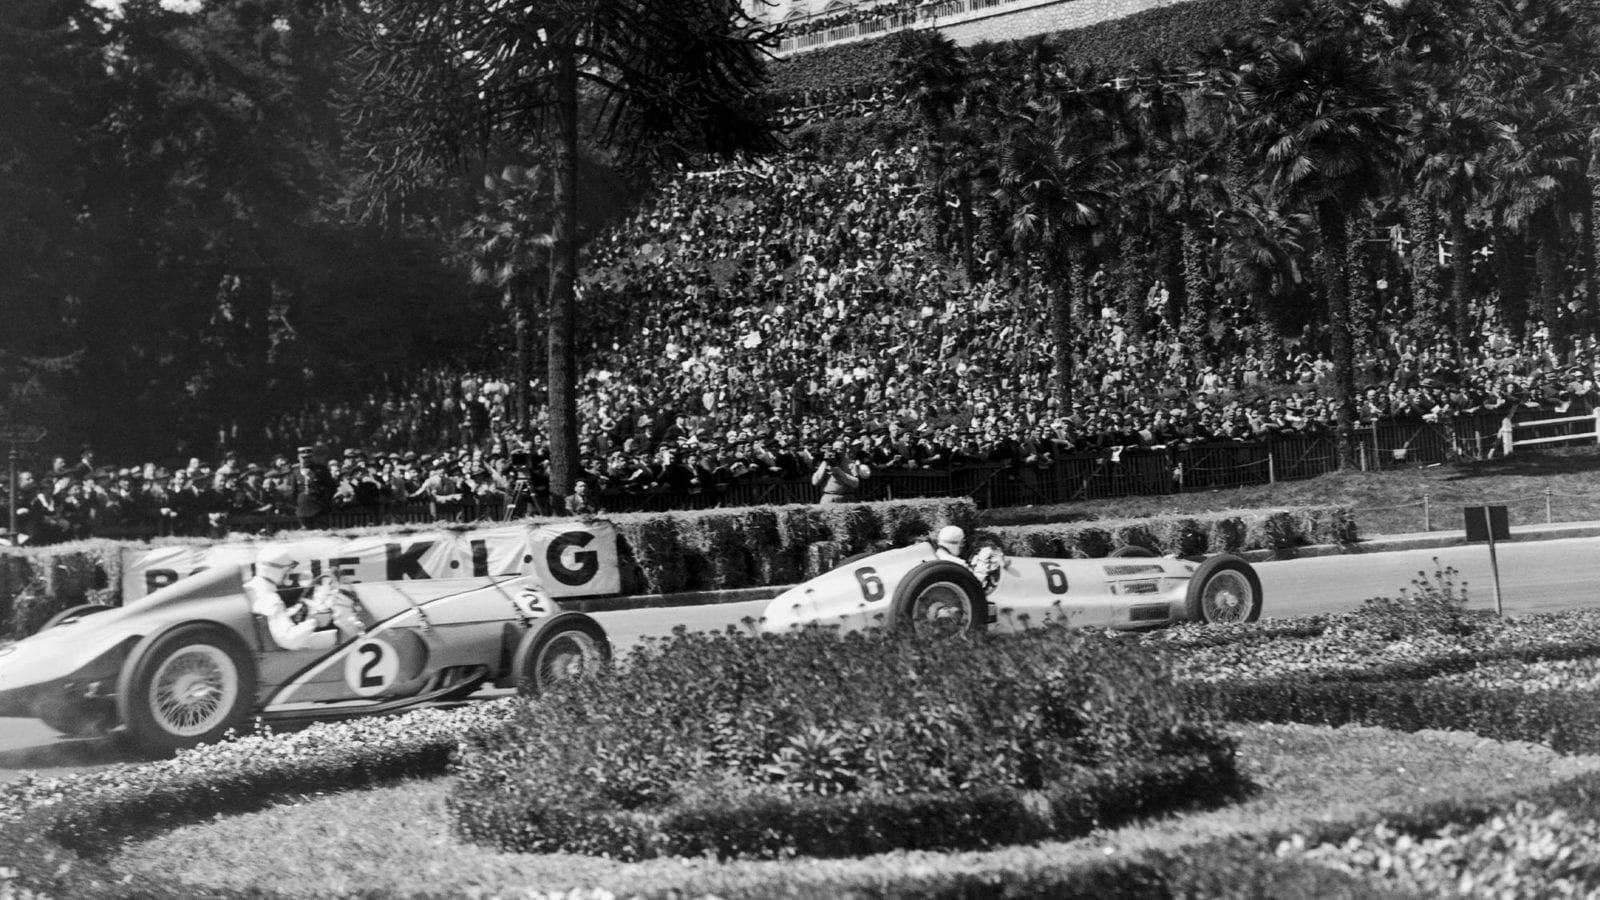 FRANCE - APRIL 11: On The Racing Circuit At The Grand Prix De Pau On April 11, 1938, The French Racecar Driver Rene Dreyfus, In A Delaye 145 (Number 2) Fights For Vies For First Place With Rudolf Caracciola In His Mercedes-Benz W154 (Number 6). (Photo by Keystone-France/Gamma-Keystone via Getty Images)